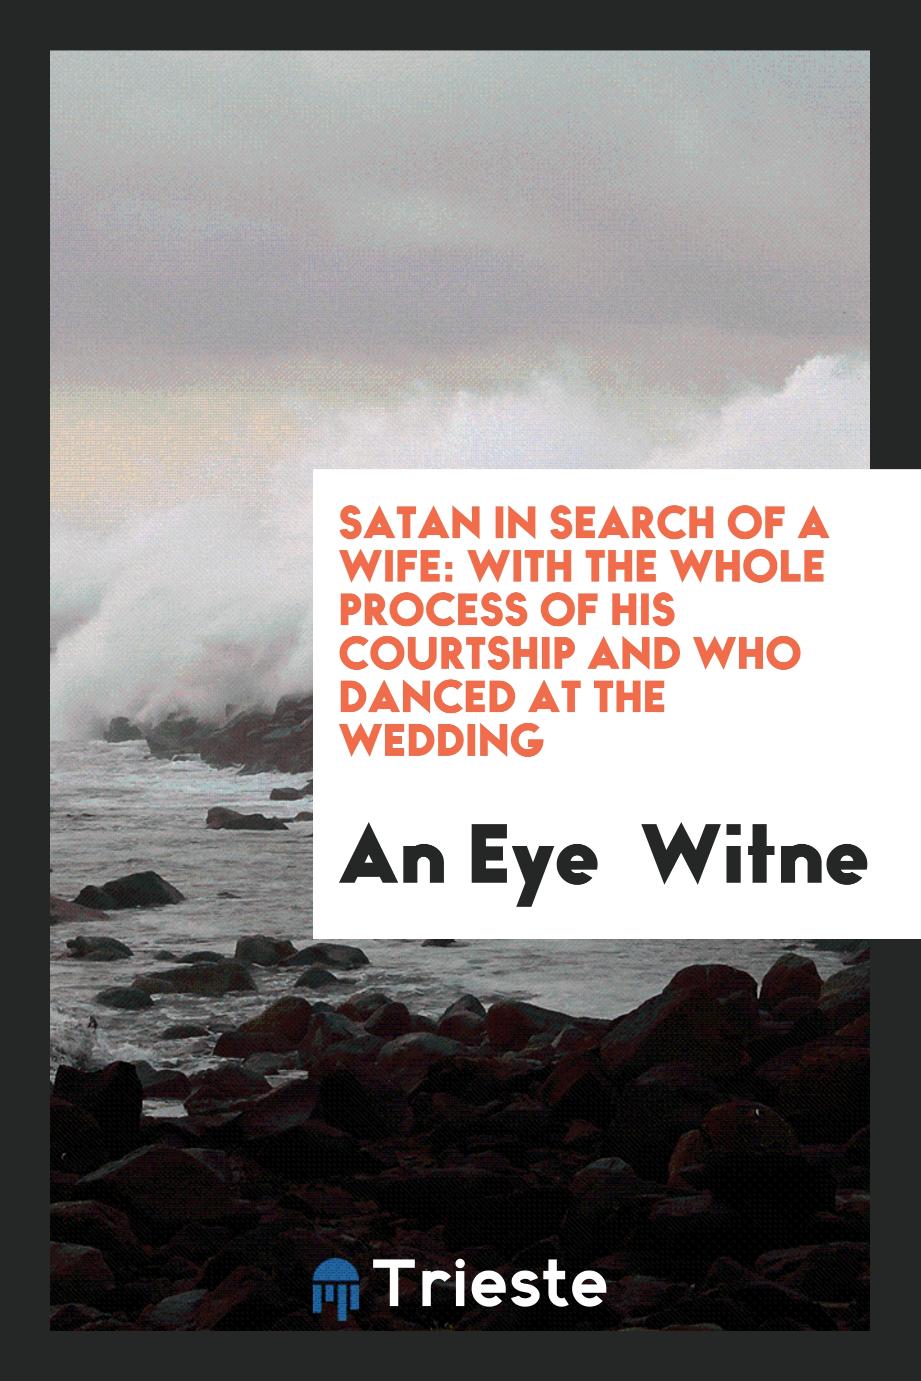 Satan in search of a wife: with the whole process of his courtship and who danced at the wedding